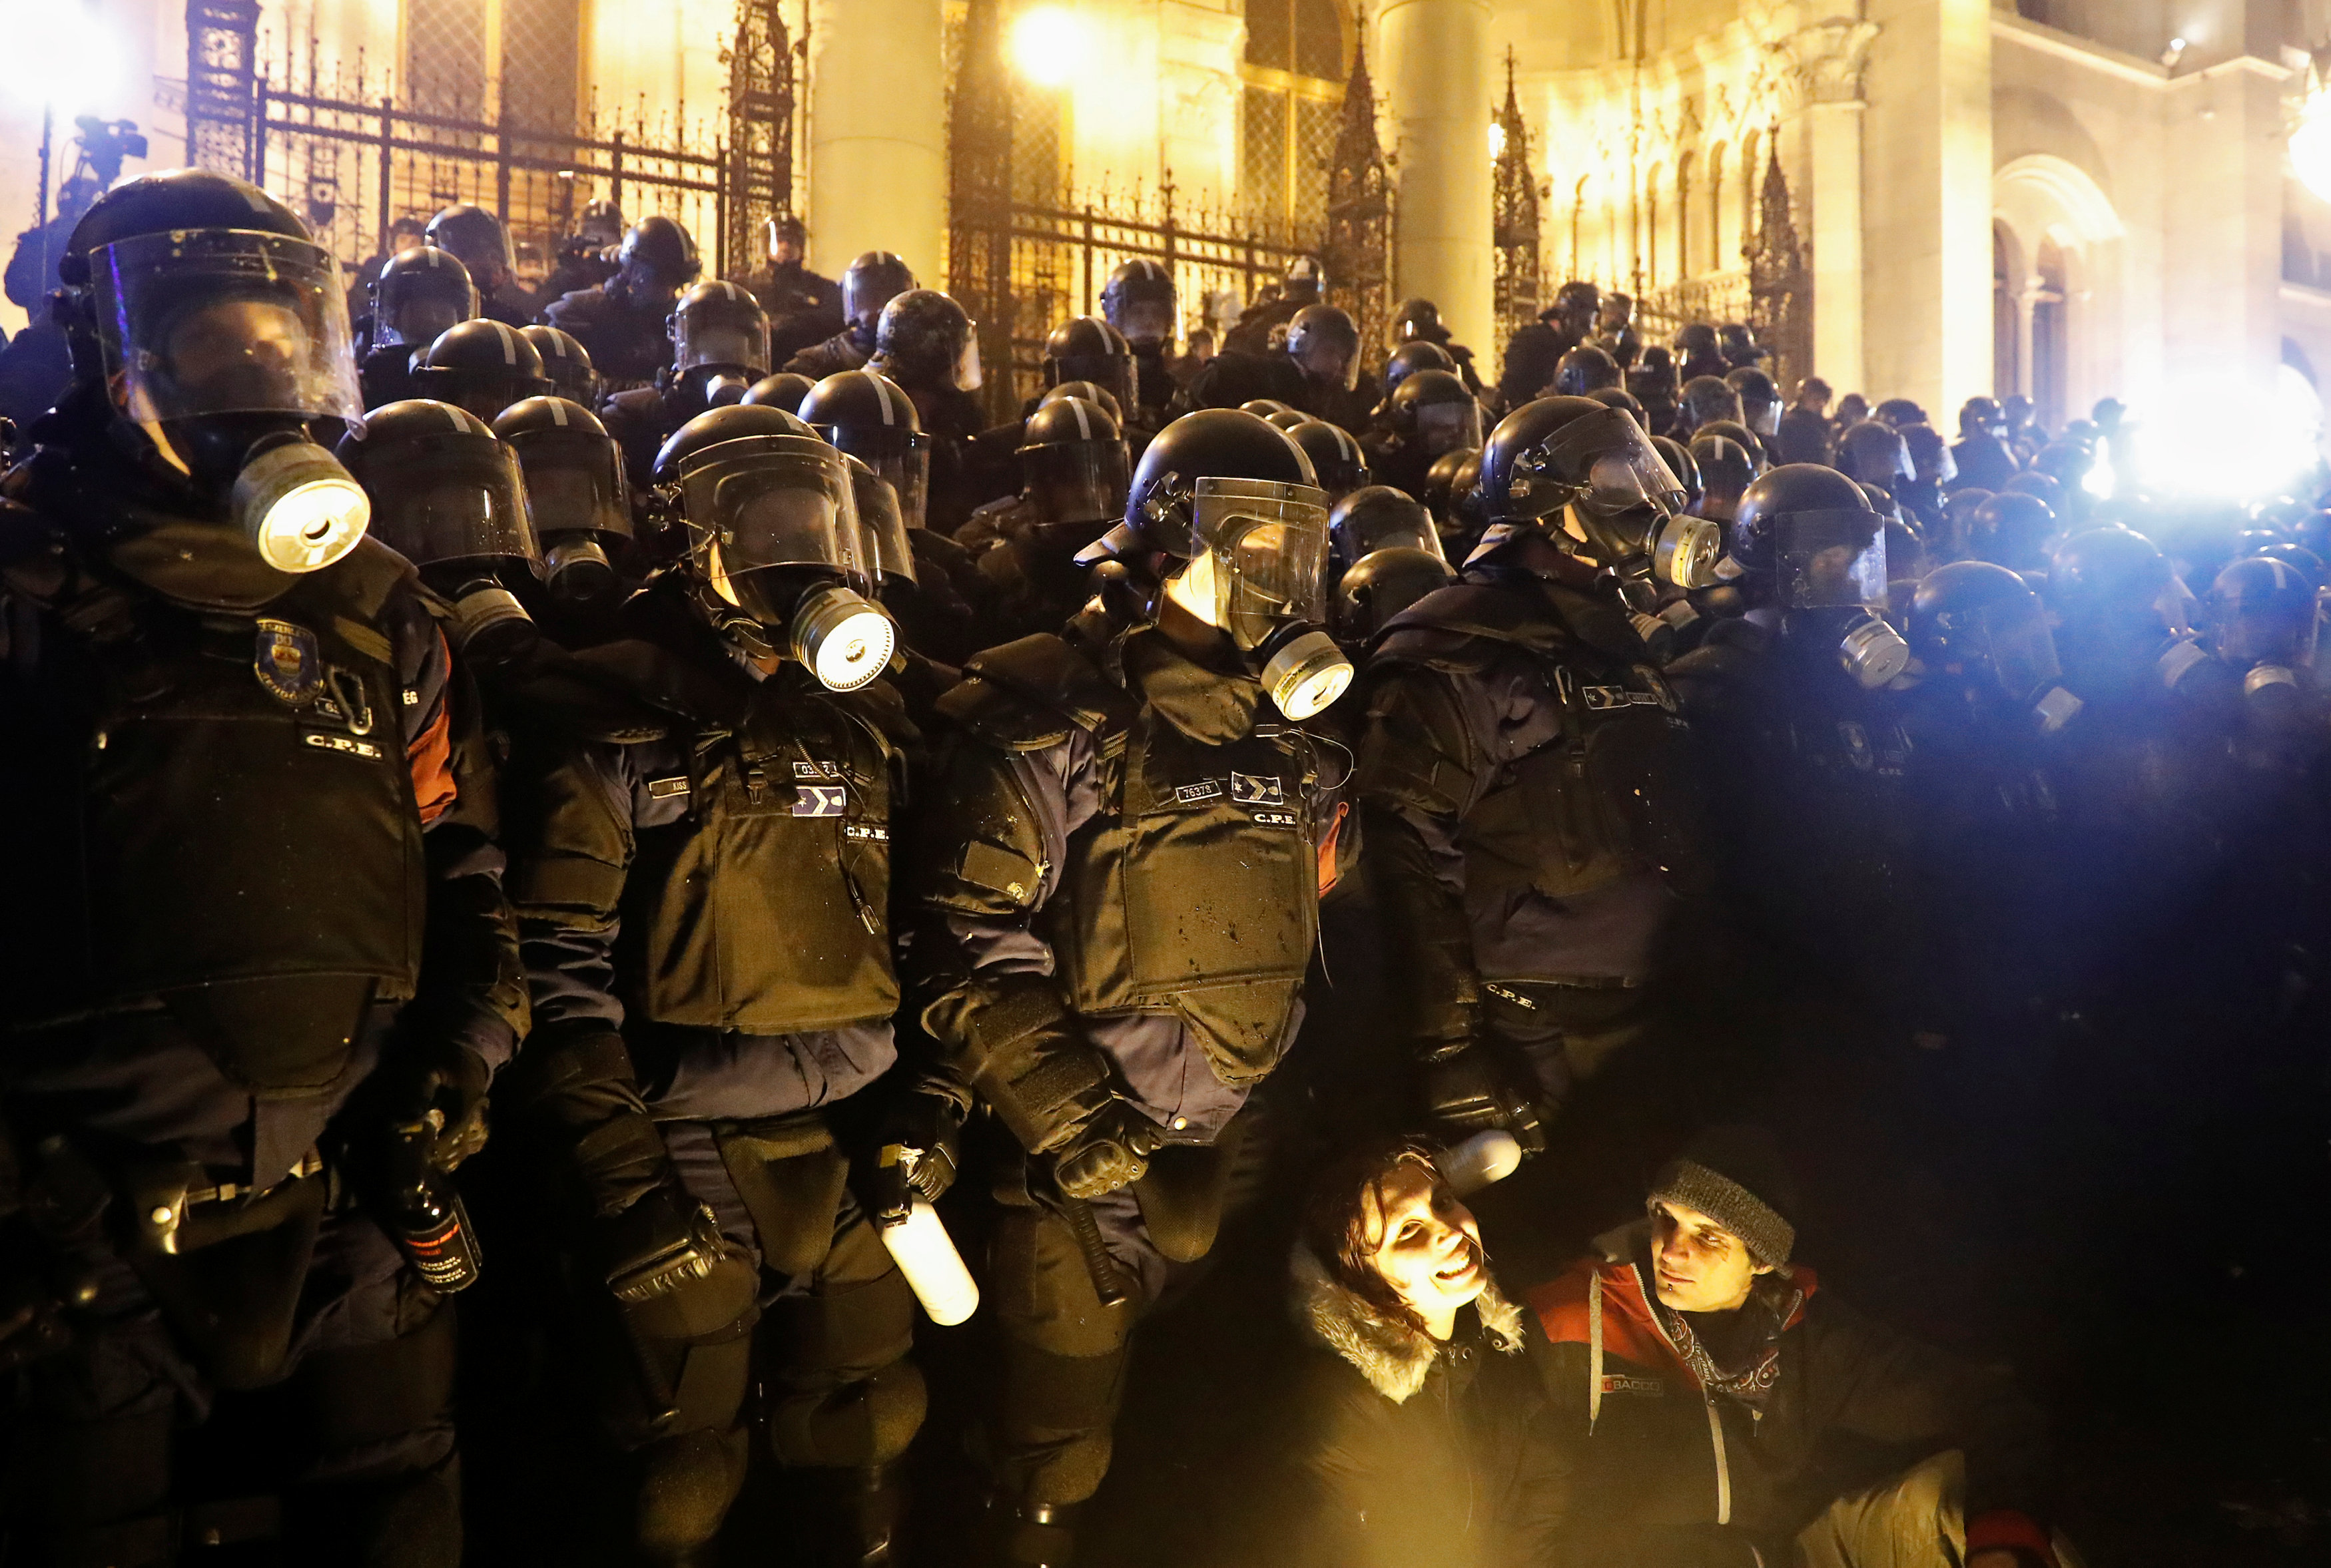 2018-12-13T230023Z_154941971_RC15BB326740_RTRMADP_3_HUNGARY-PROTESTS